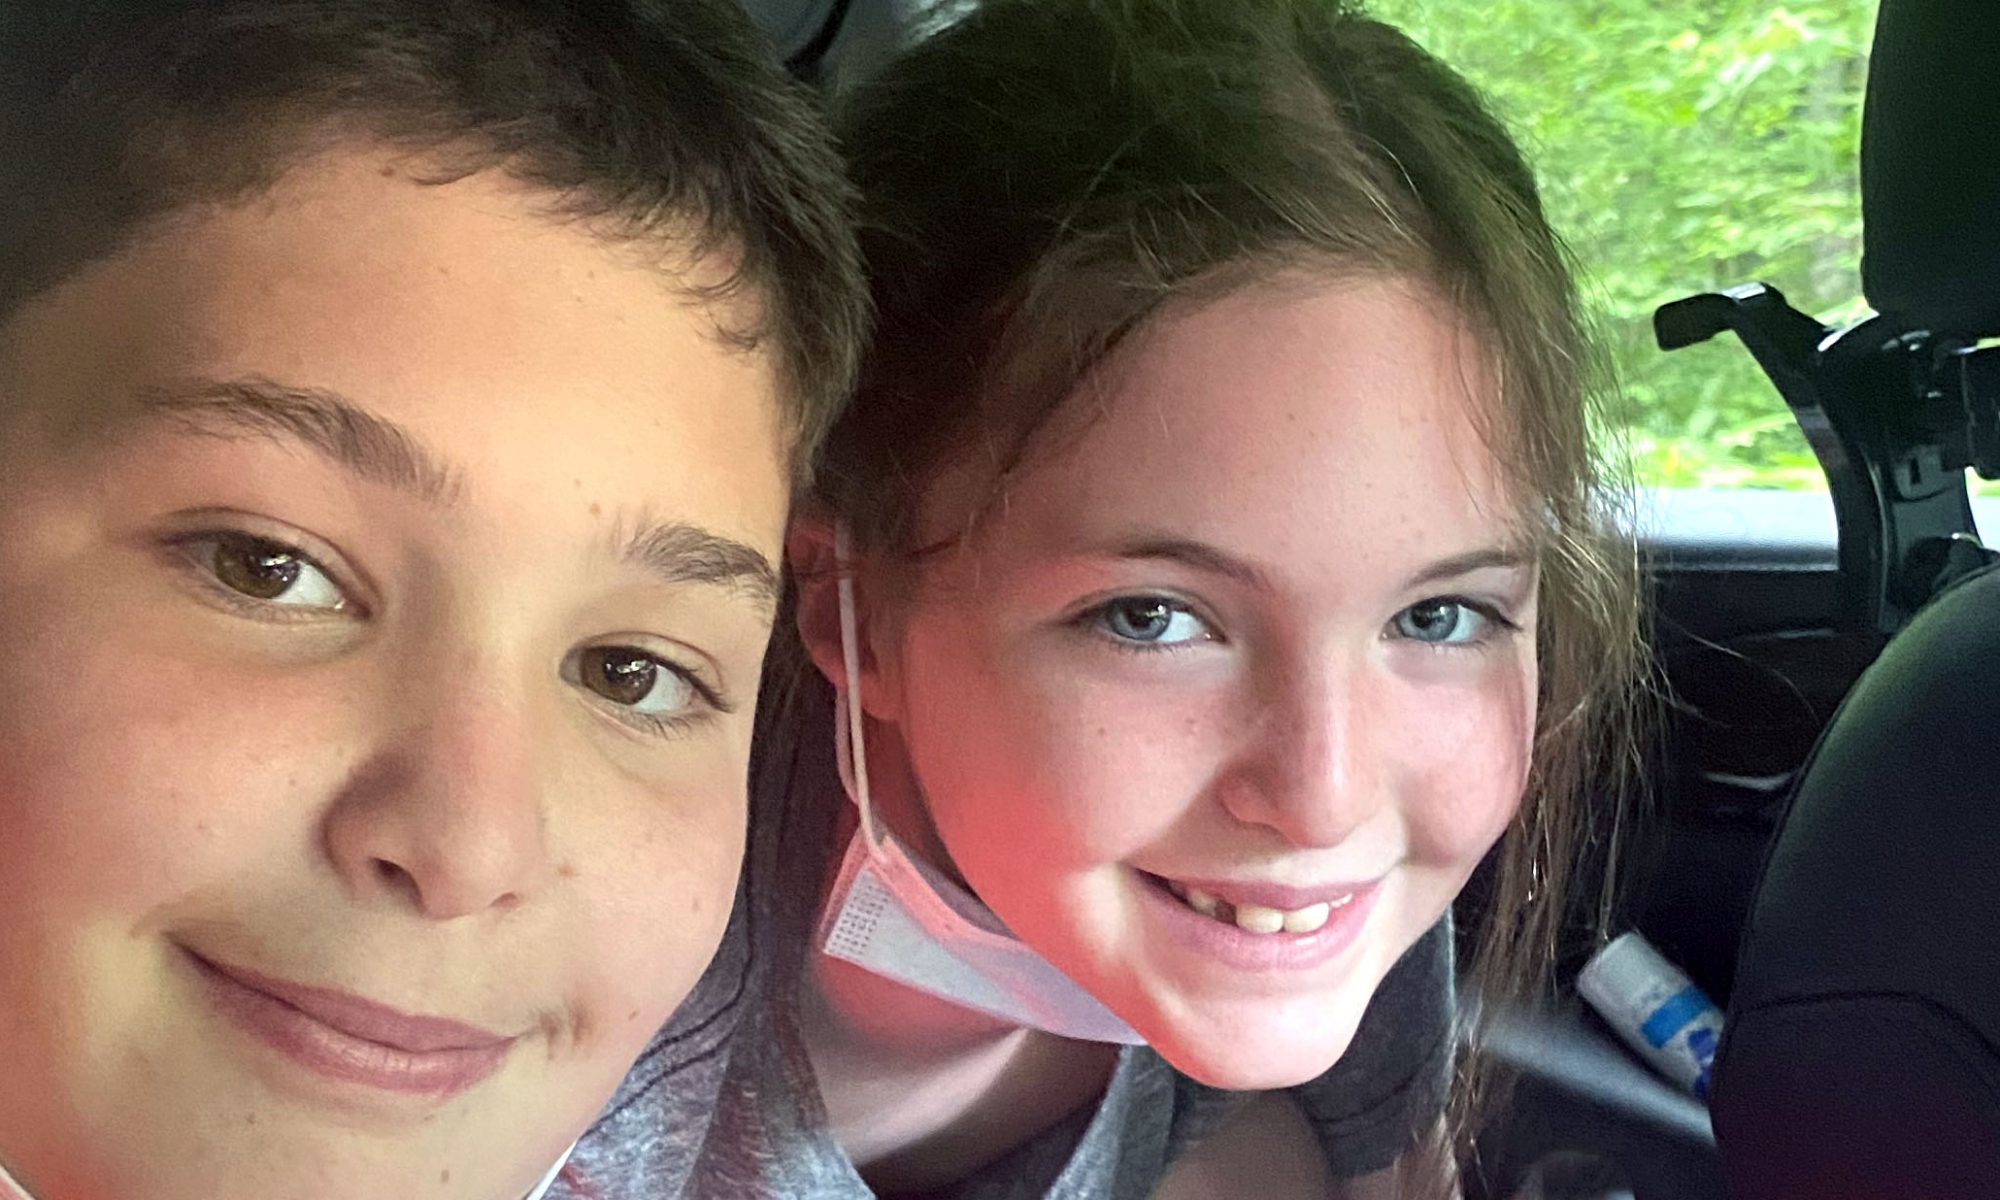 two-children-ride-in-backseat-of-car-smiling